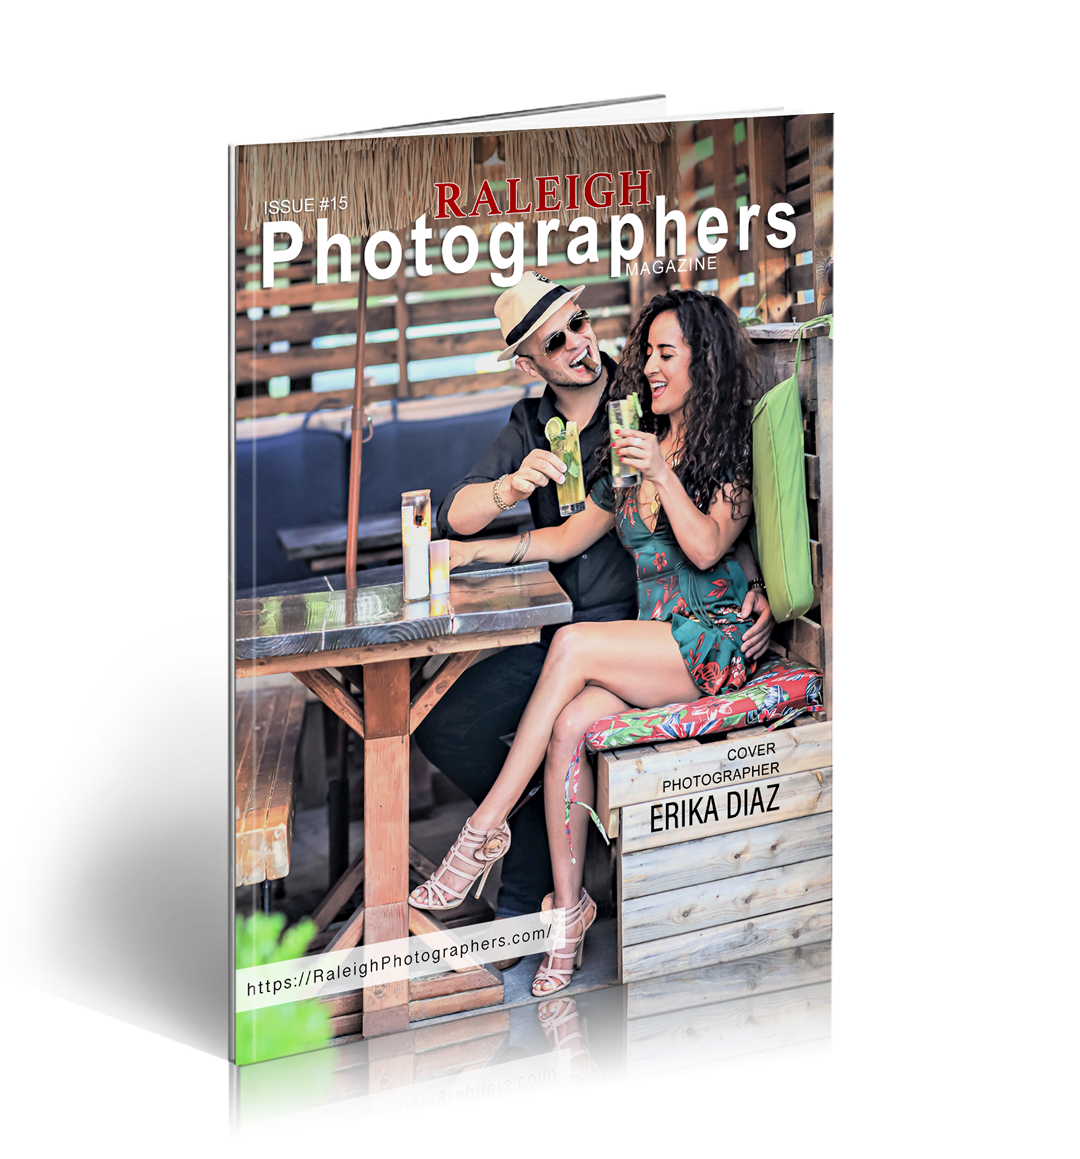 Raleigh Photographers Issue #15